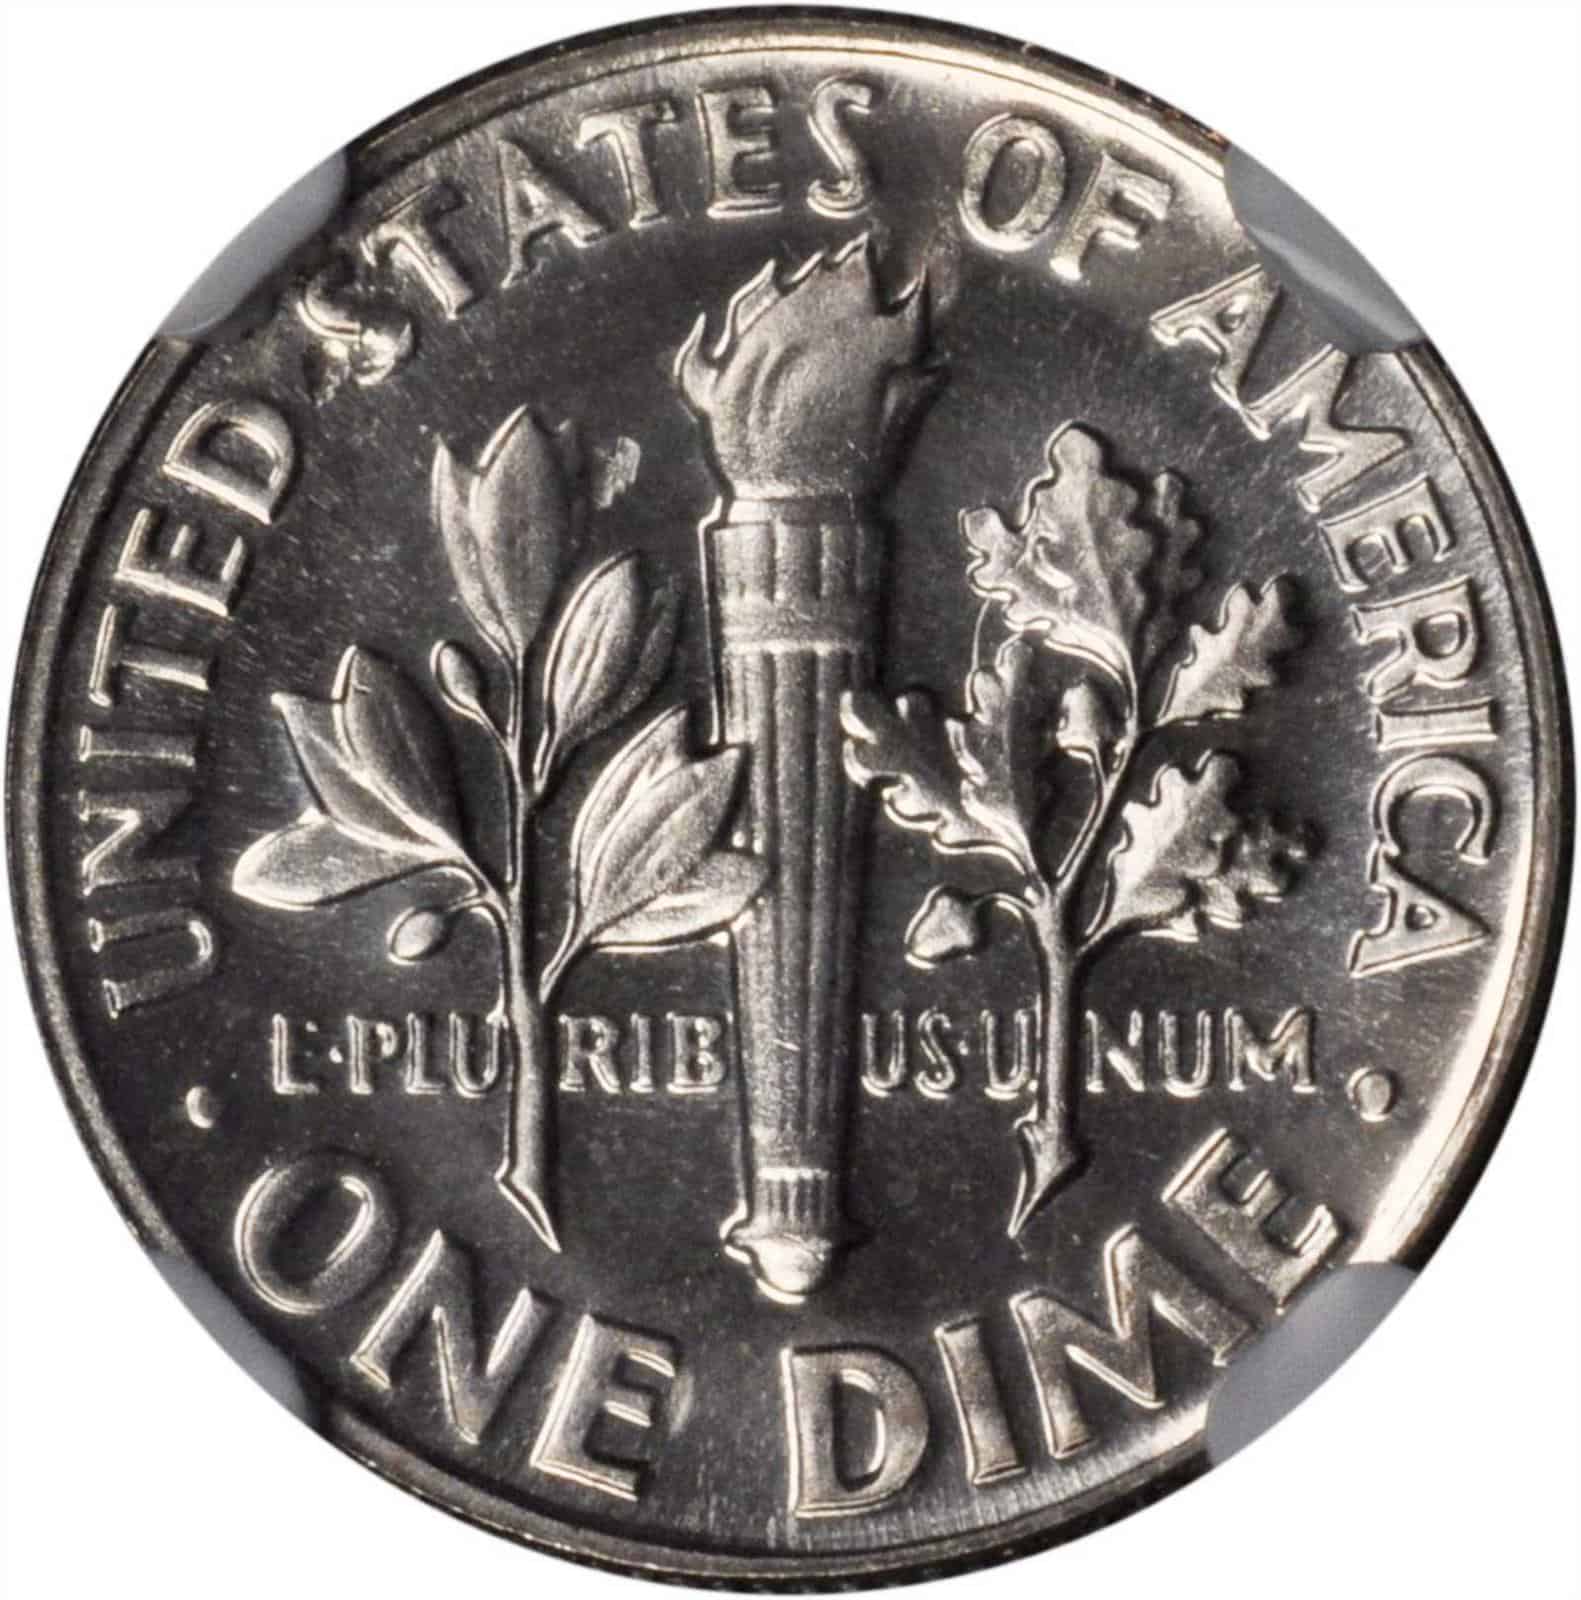 The Reverse of the 1966 Dime